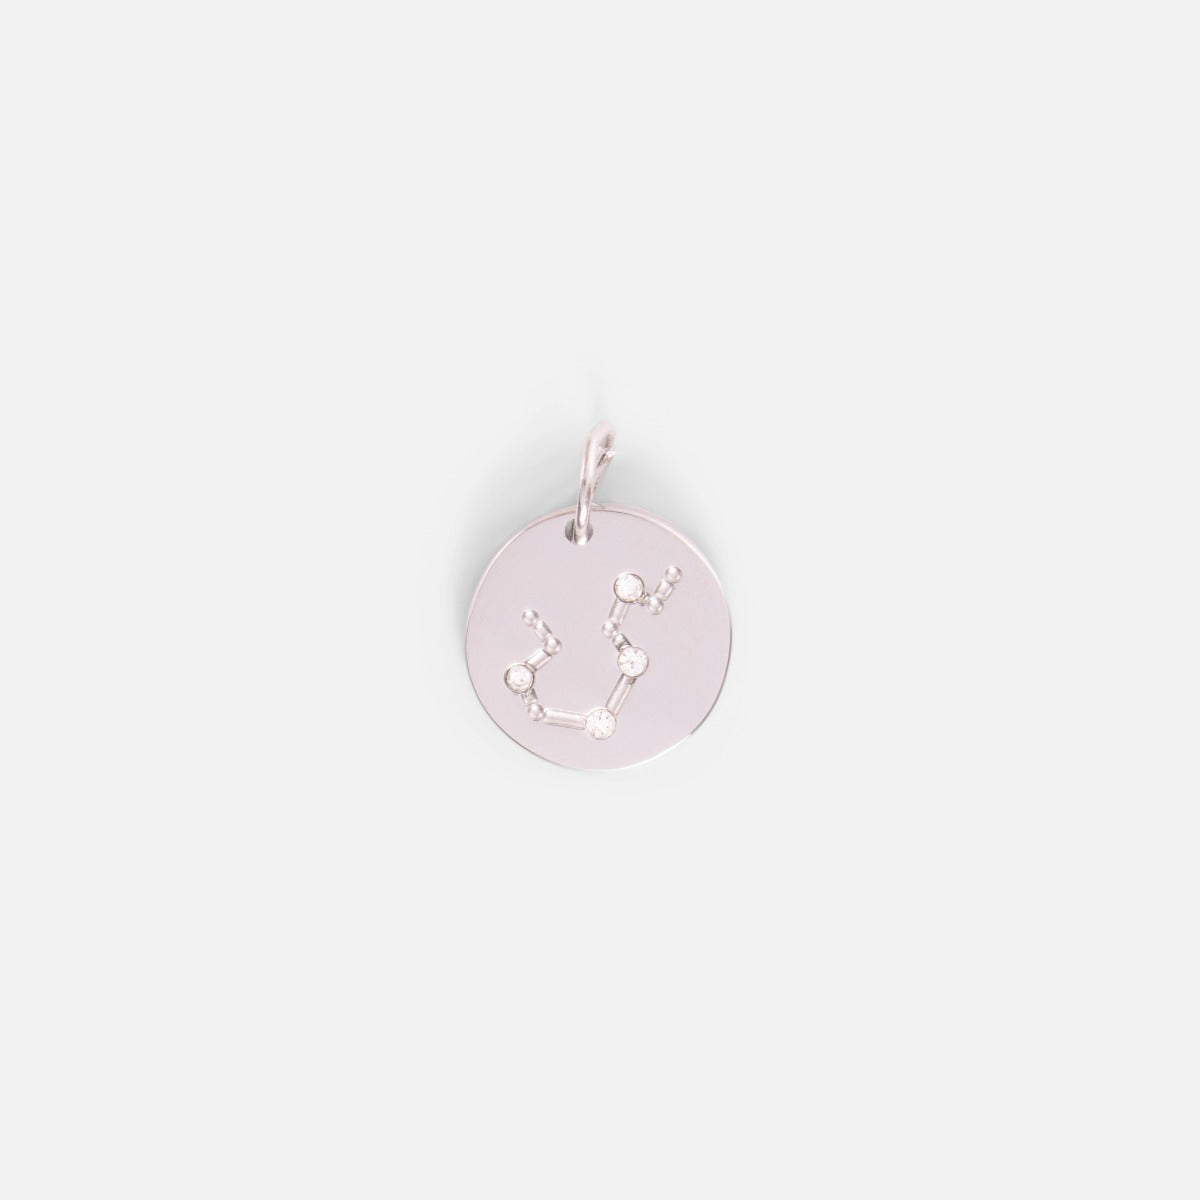 Small silvered charm engraved with the zodiac constellation "aquarius"